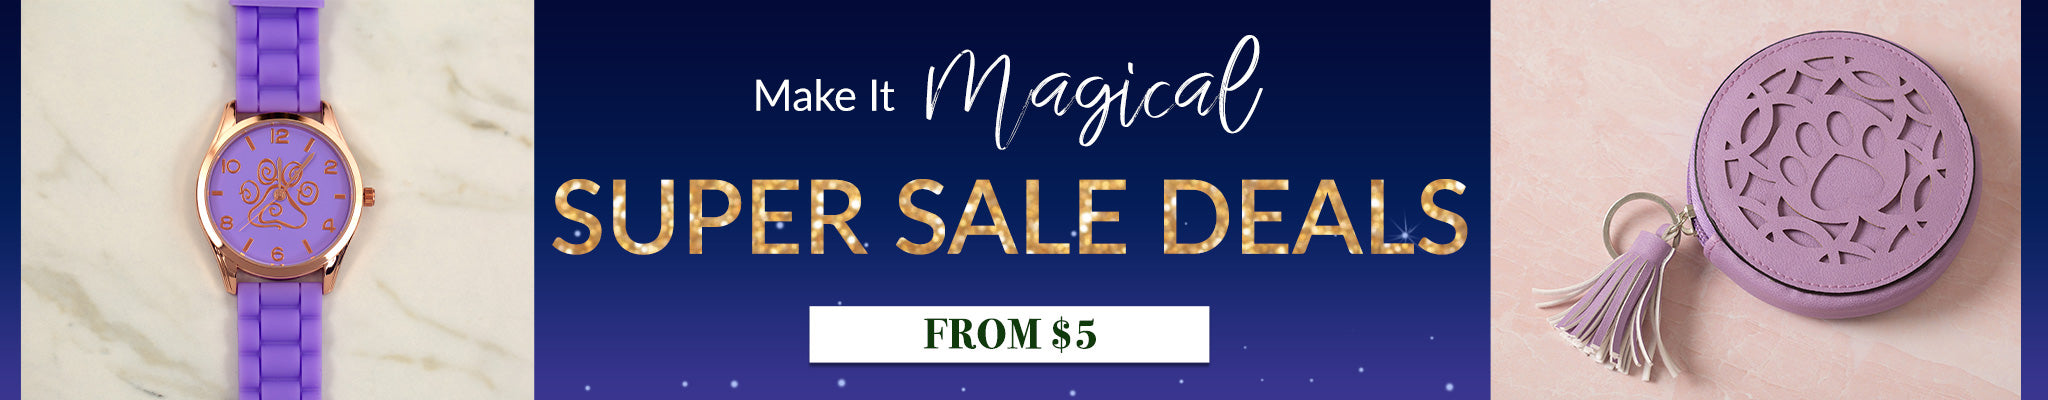 Make it Magical | Super Sale Deals | From $5